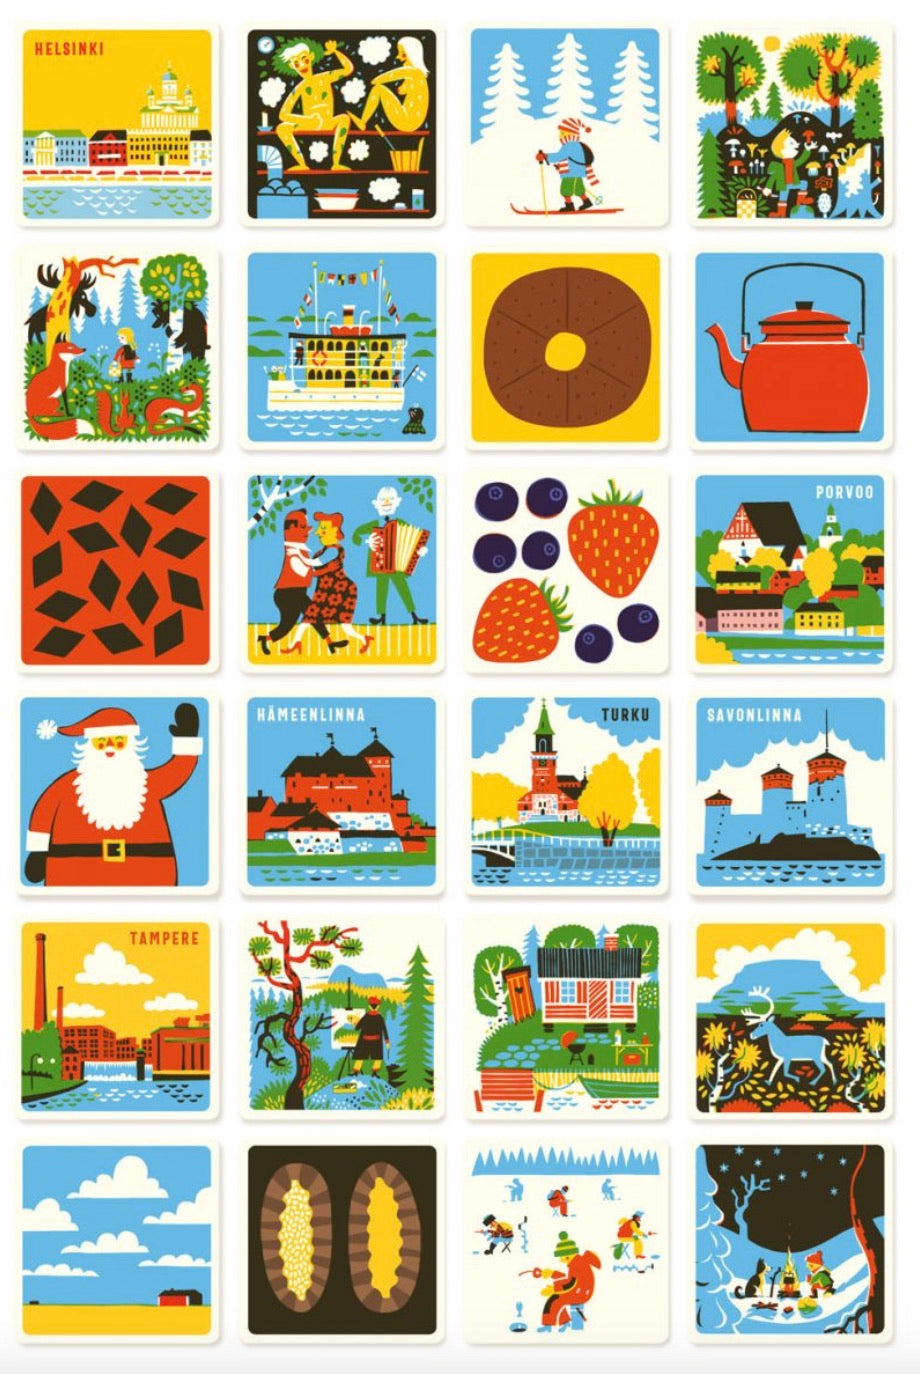 24 Illustration cards for the memory game. Colors are blue, red, yellow, green  black and white. Illustrations include a tea pot, winter scenes, sauna scene, Santa Claus and many more. 